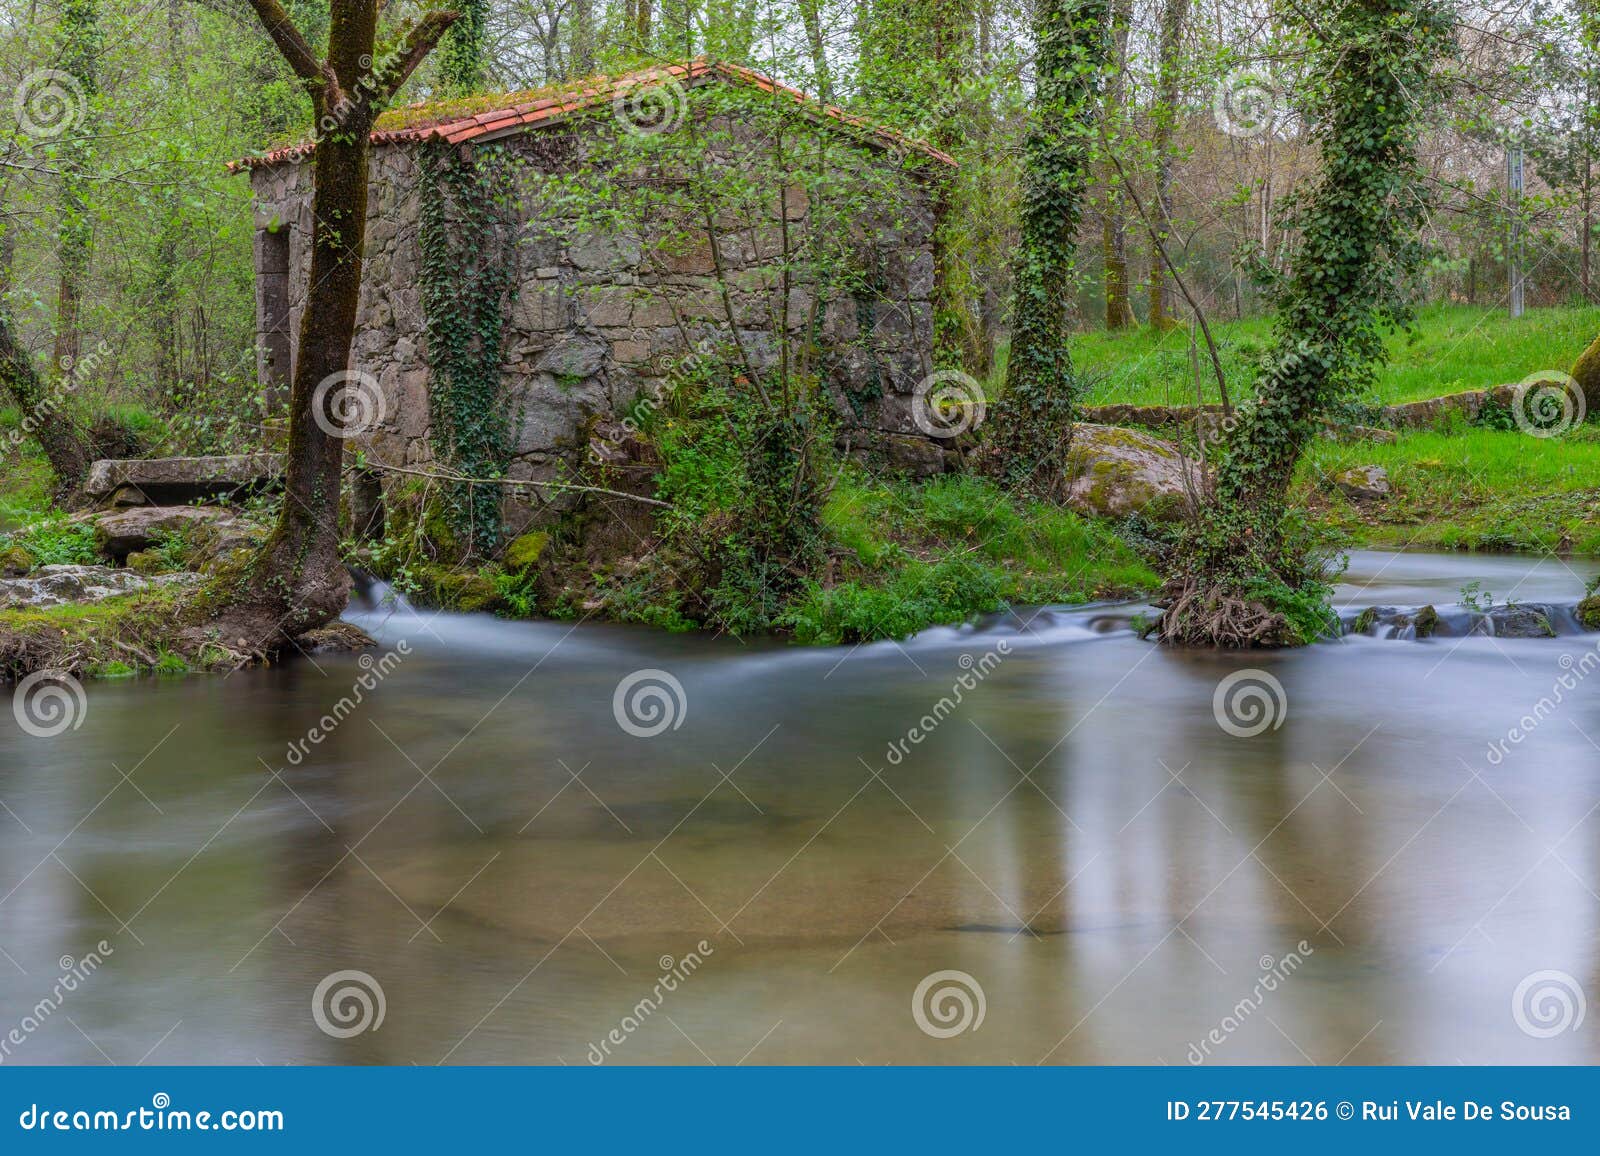 old watermill in homem river